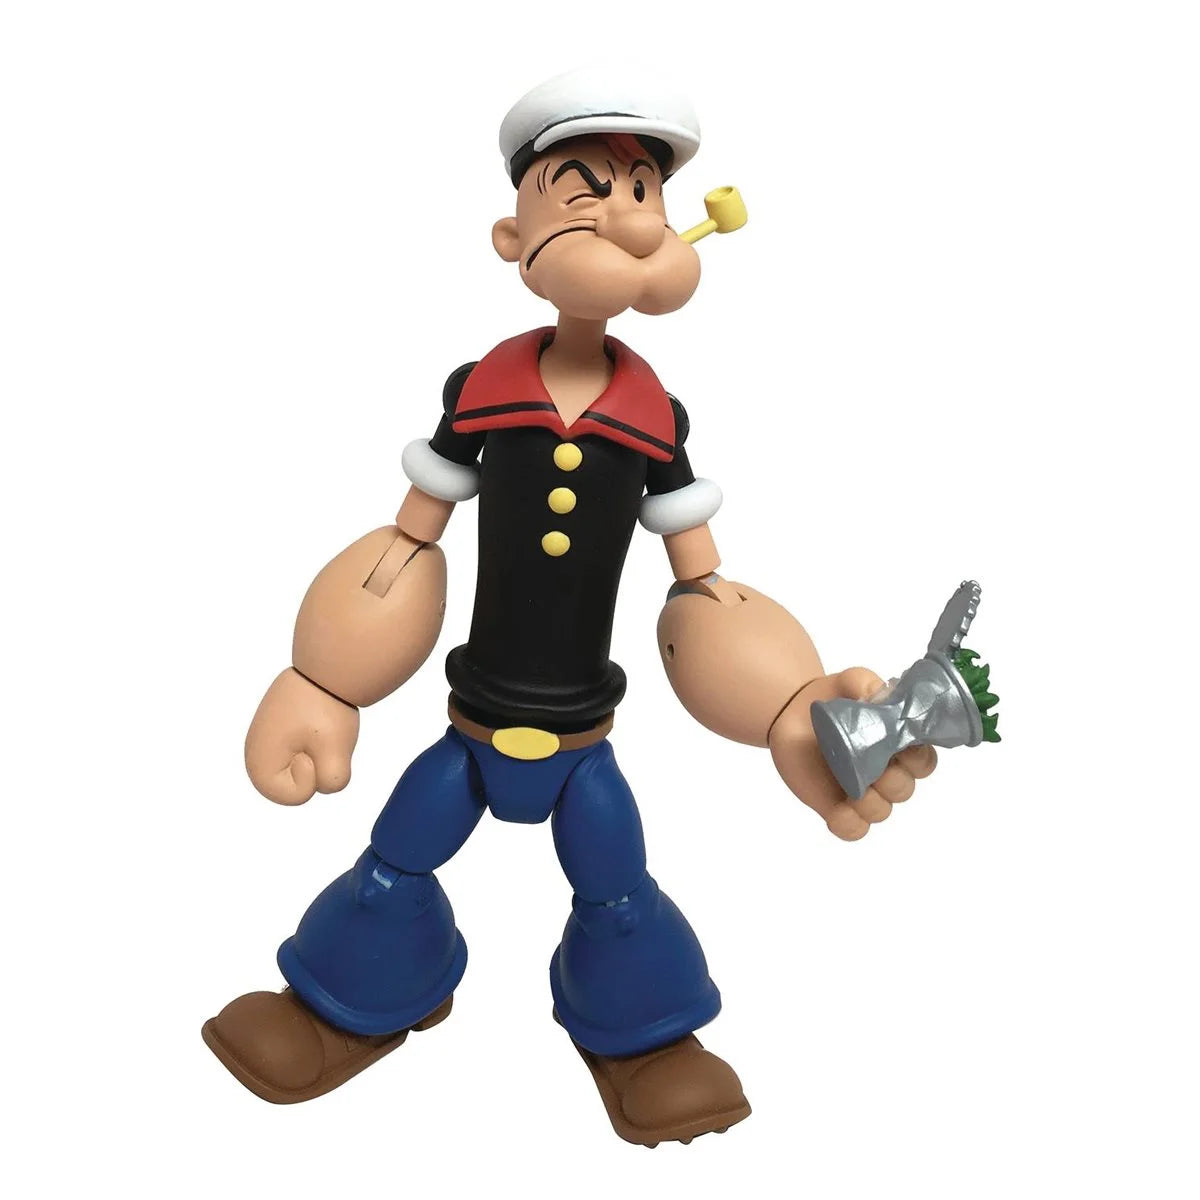 Popeye Classics Popeye the Sailor Man 1:12 Scale Wave 1 Action Figure